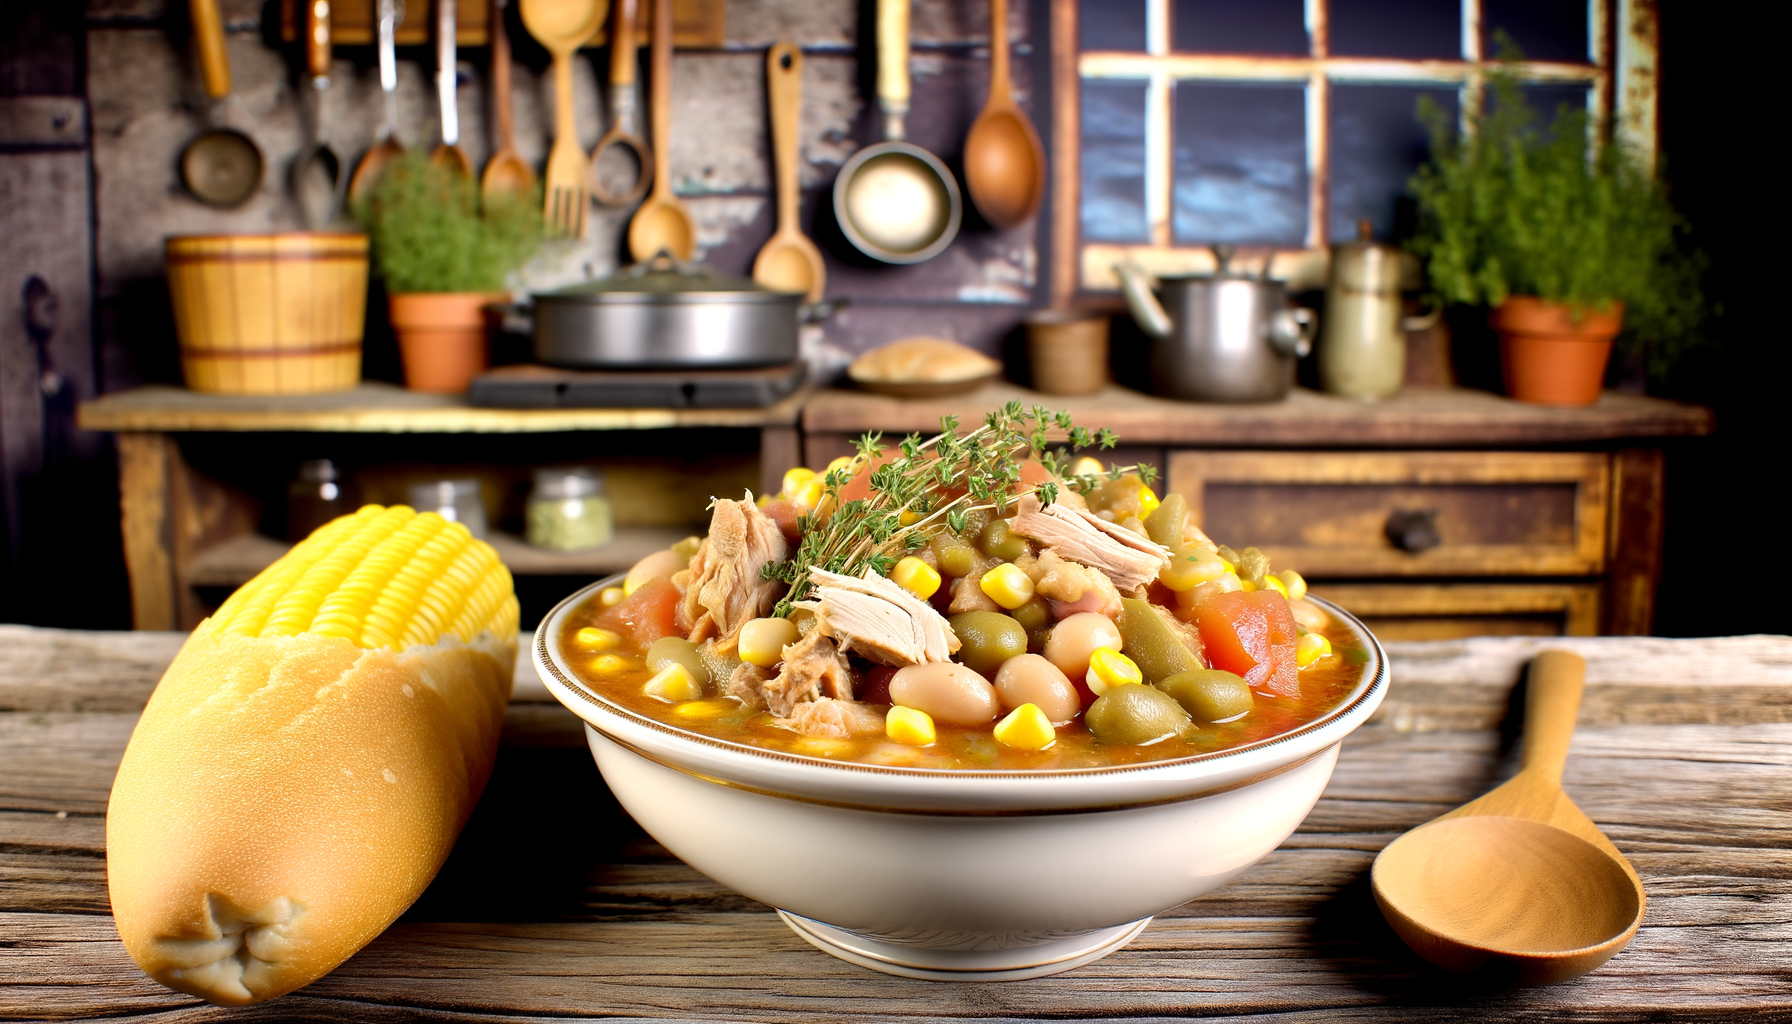 Hearty traditional Brunswick Stew with chicken, pork, beans, corn, and tomatoes in a porcelain bowl on a rustic wooden table.